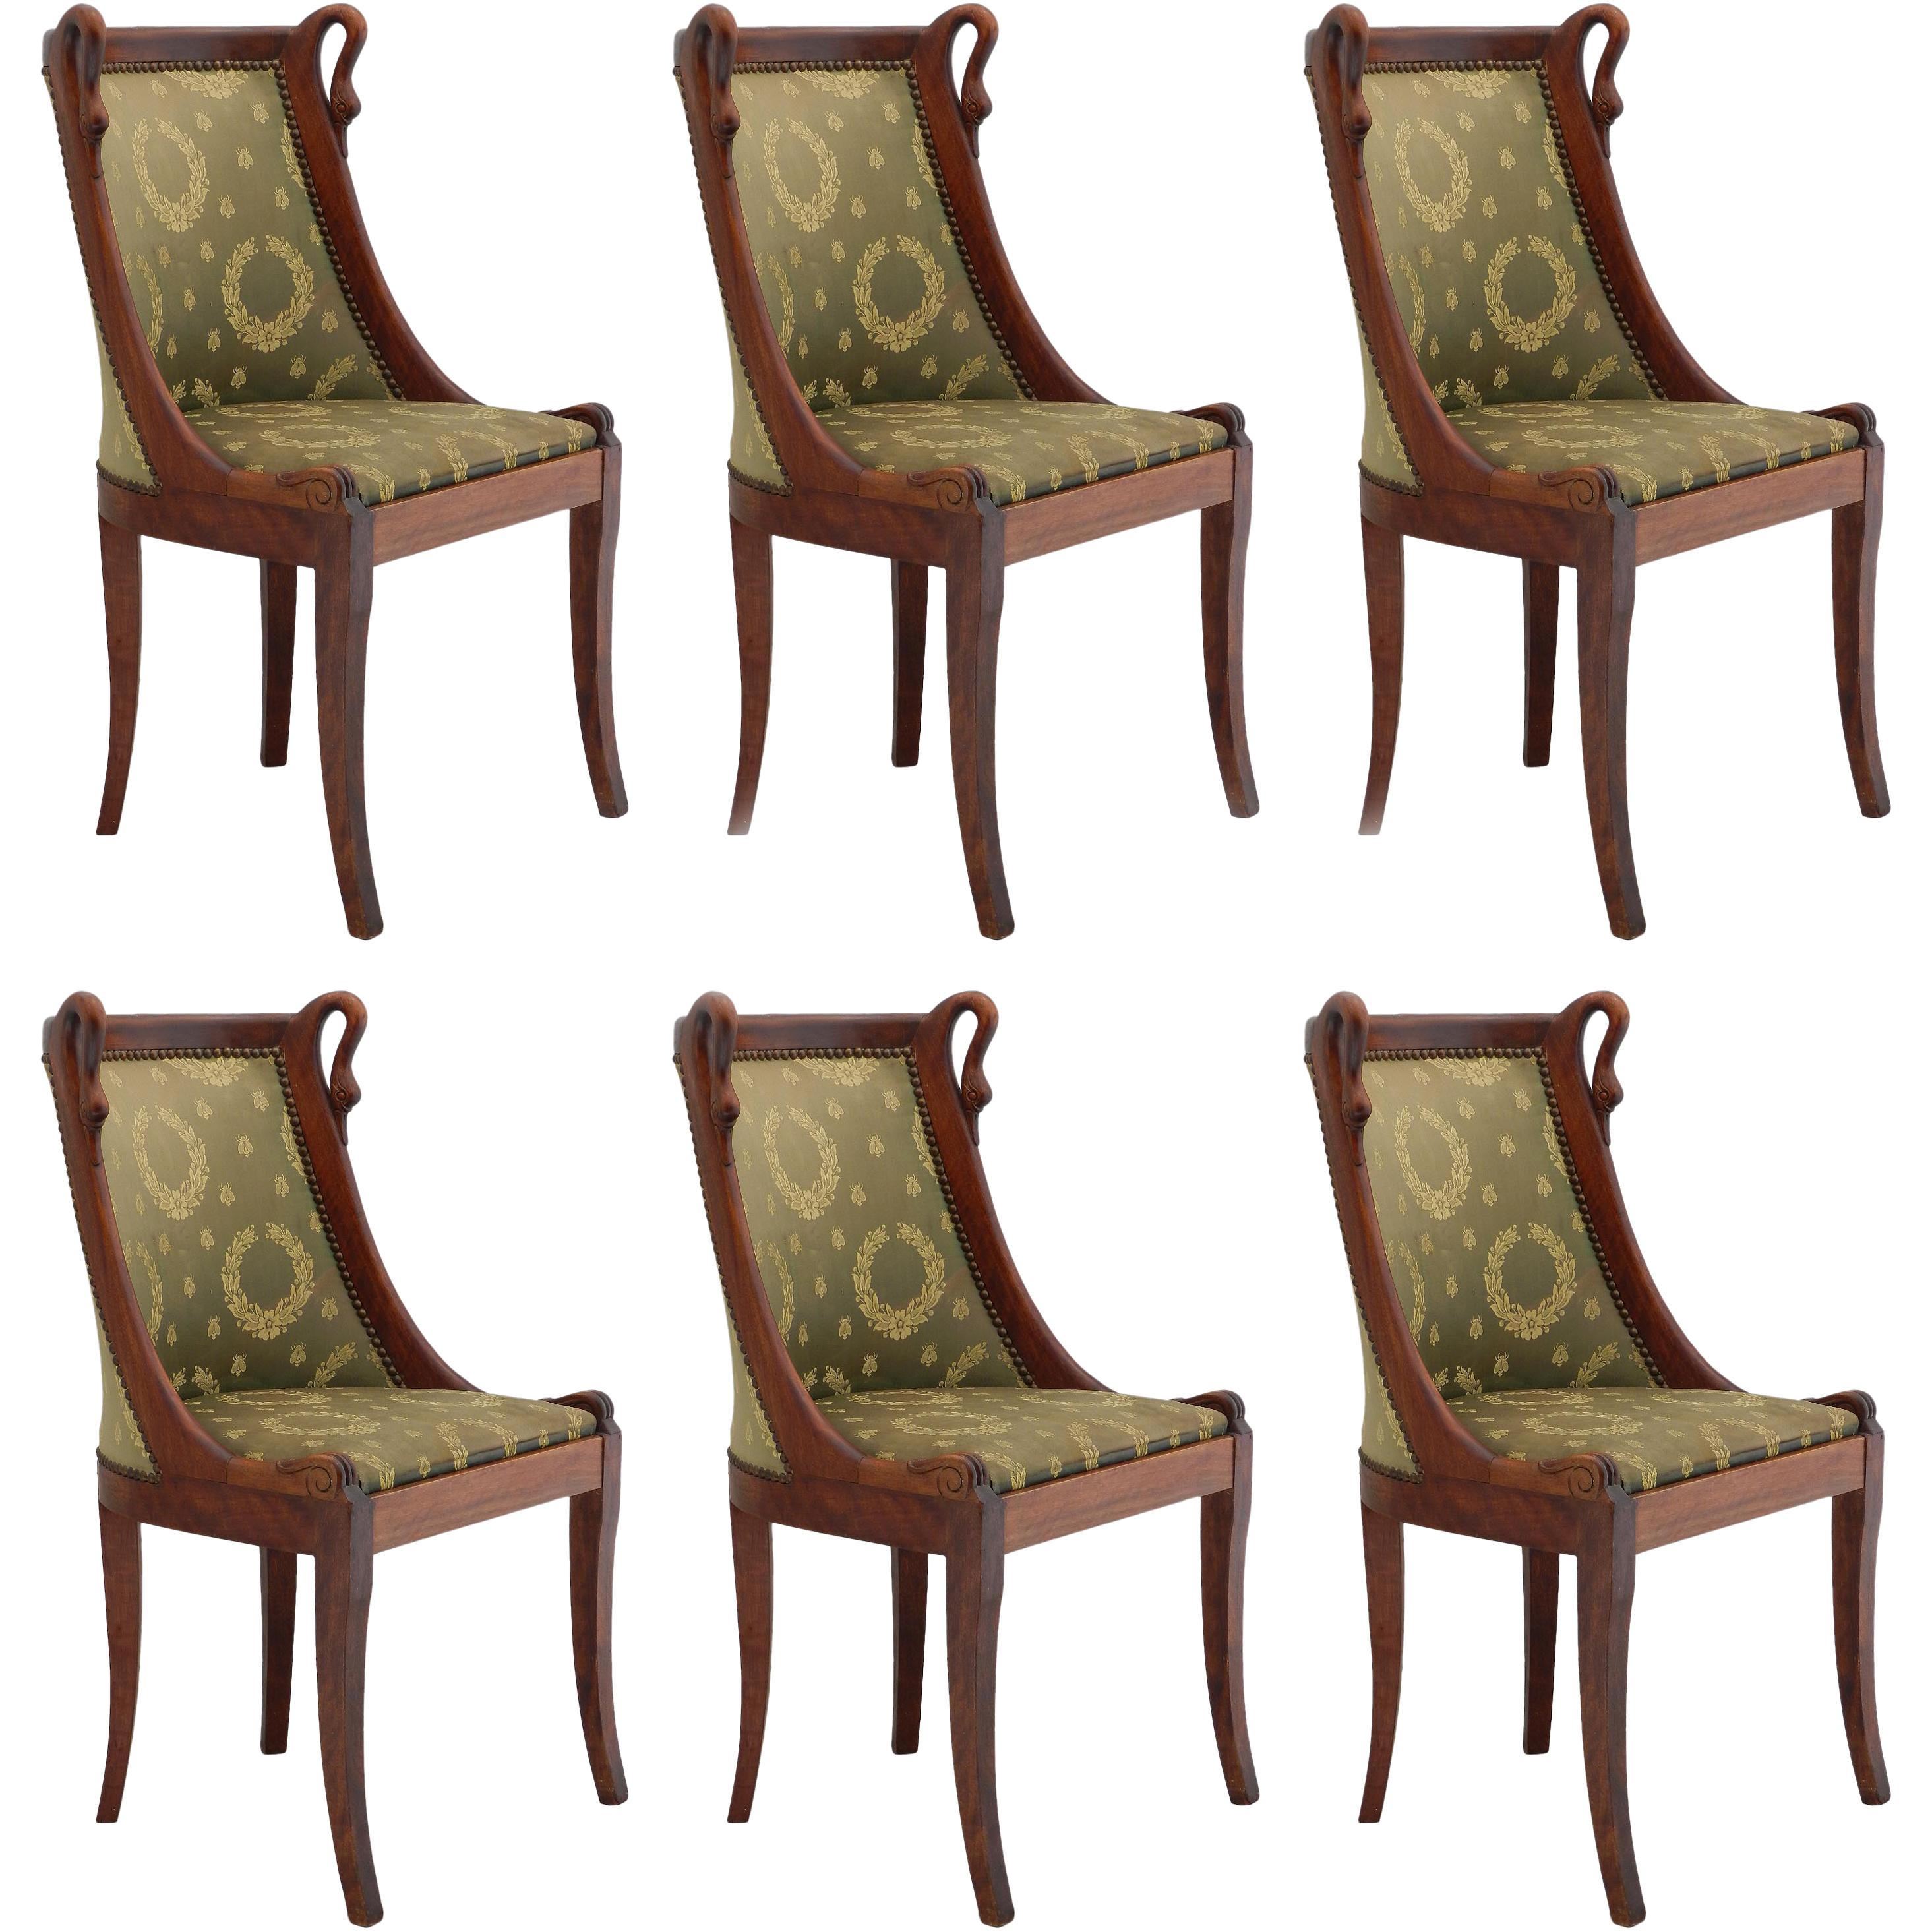 Six Dining Chairs French Empire Revival Swan Neck to Recover